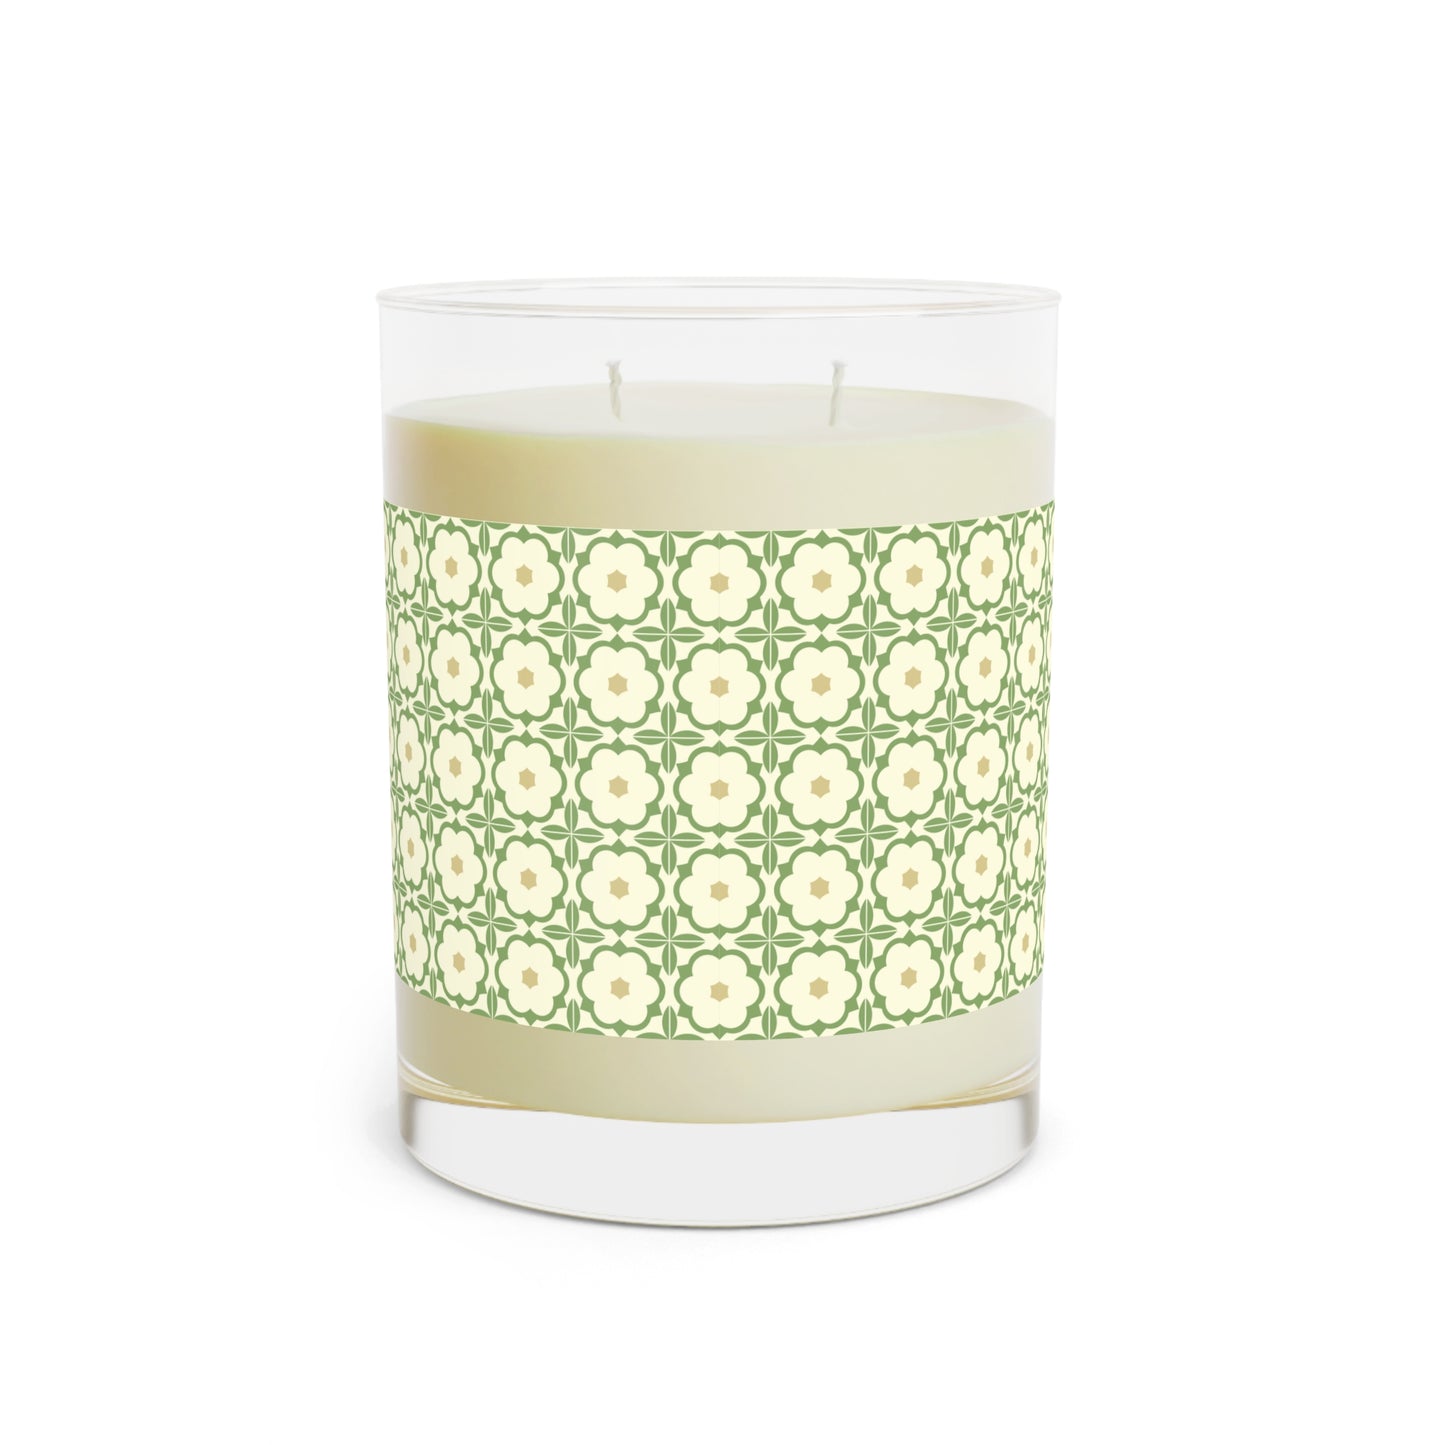 Scented Soy Aromatherapy Candle Home Decor Gift